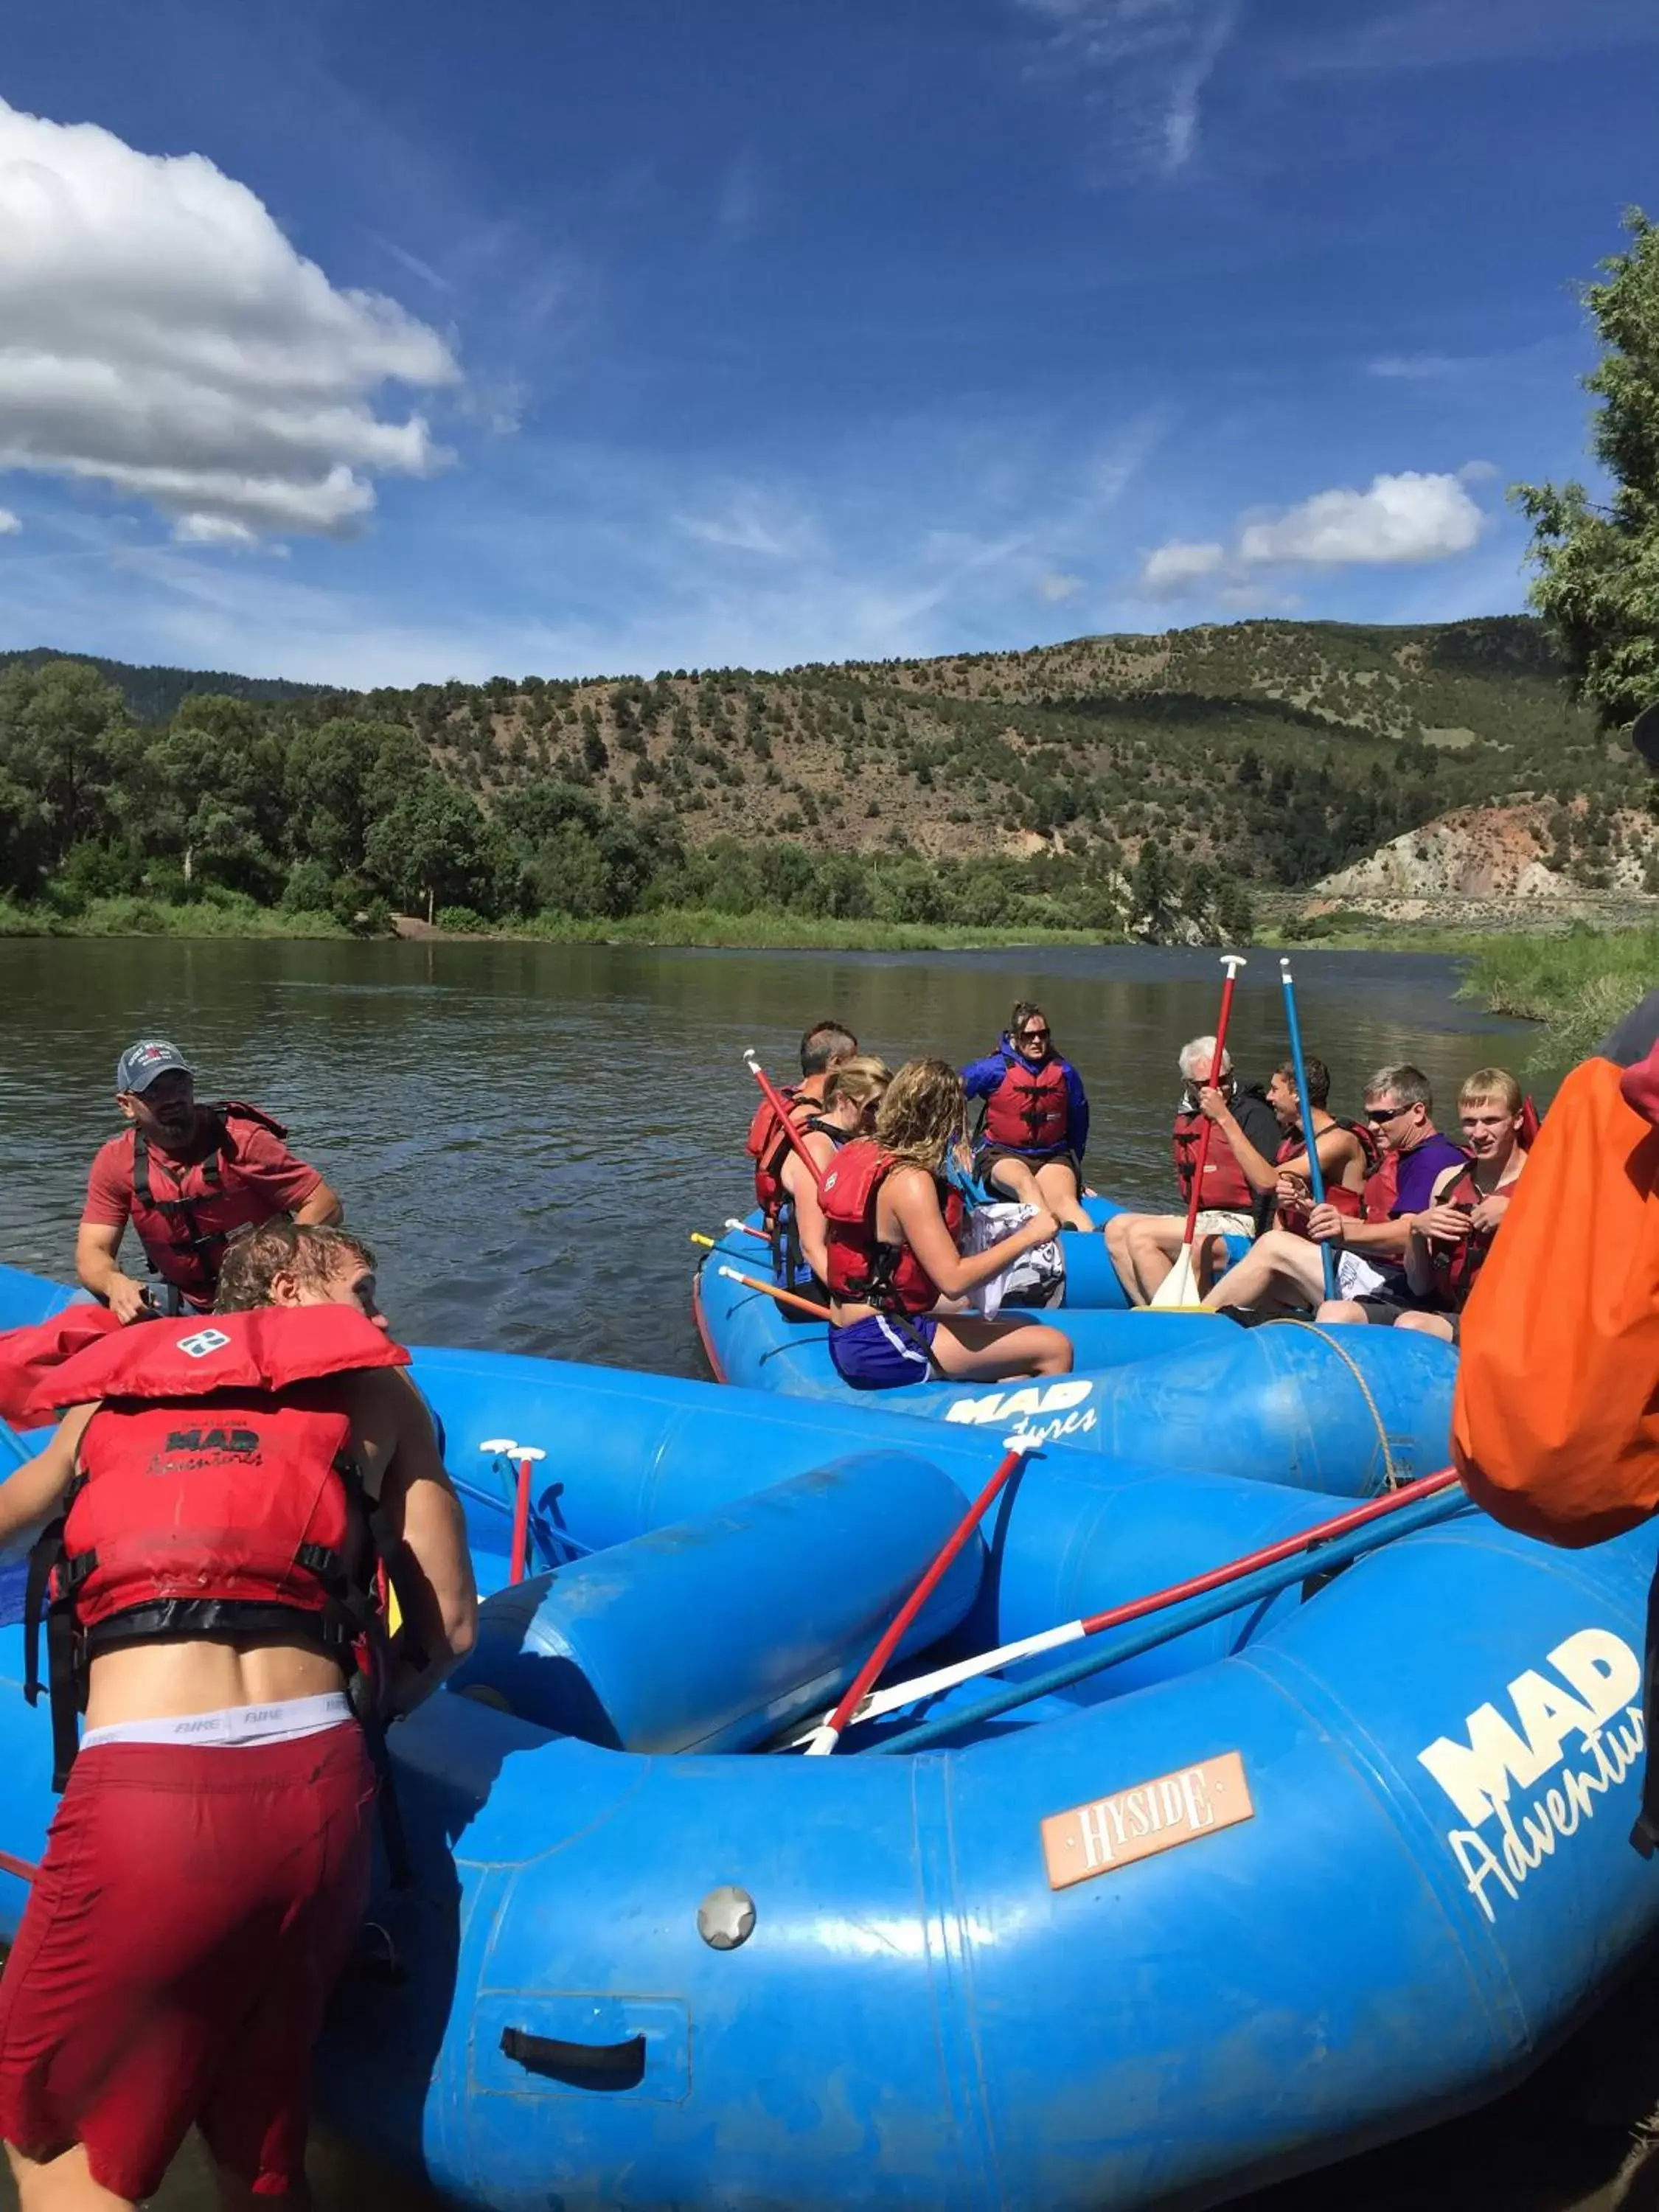 Entertainment, Canoeing in Legacy Vacation Resorts Steamboat Springs Hilltop